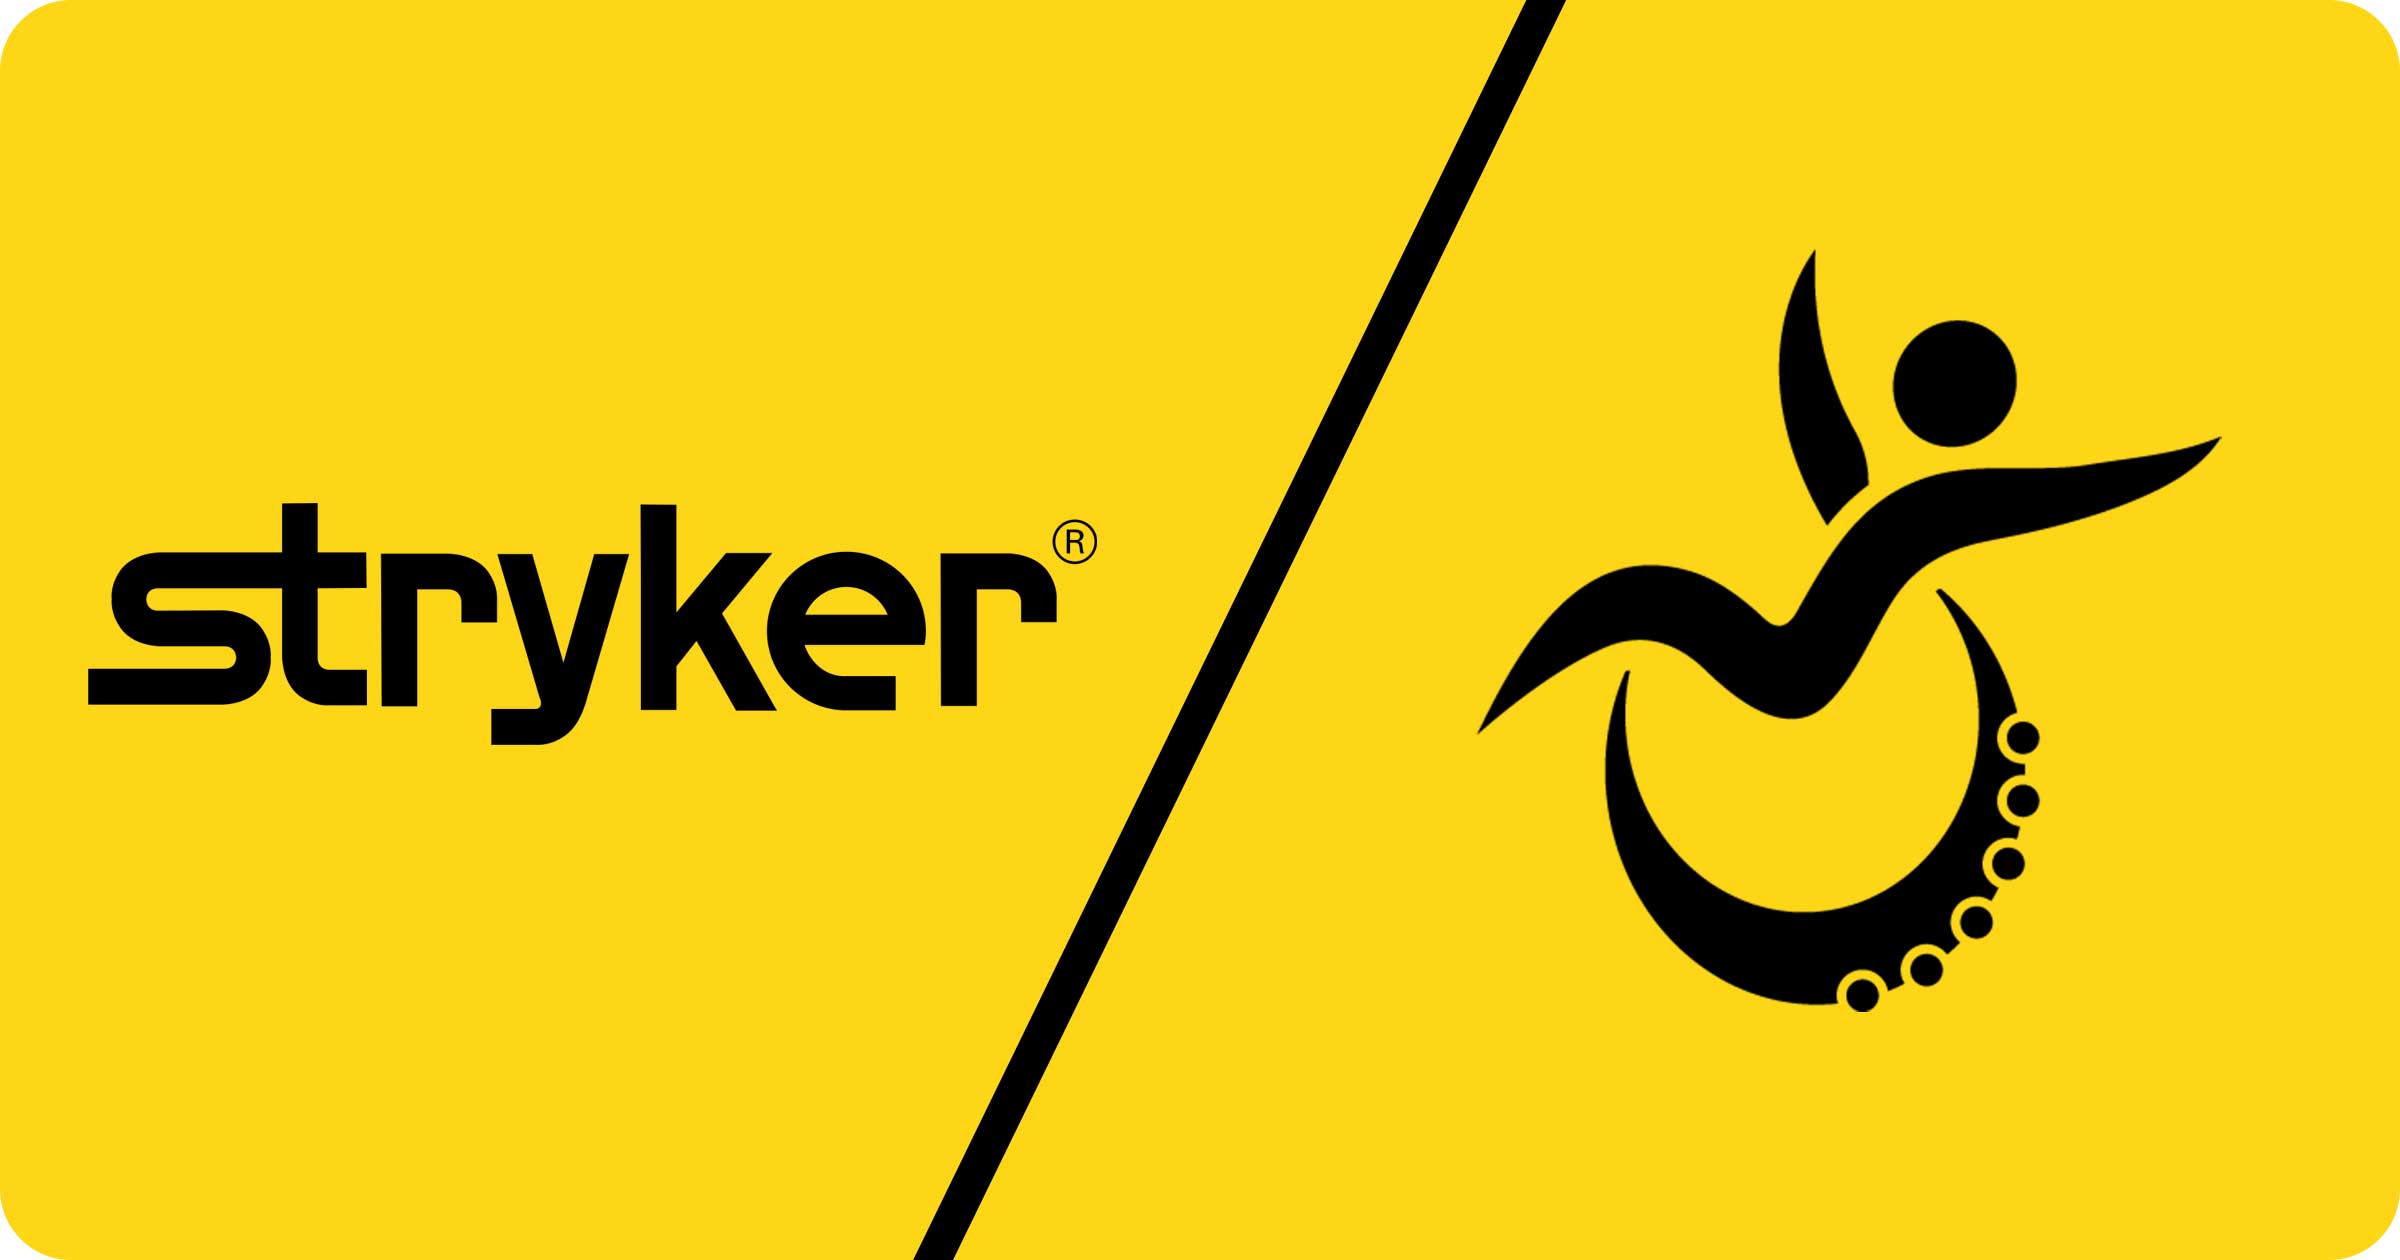 Yellow background with black line drawings of the Stryker logo and the Mobile Stairlift logo.